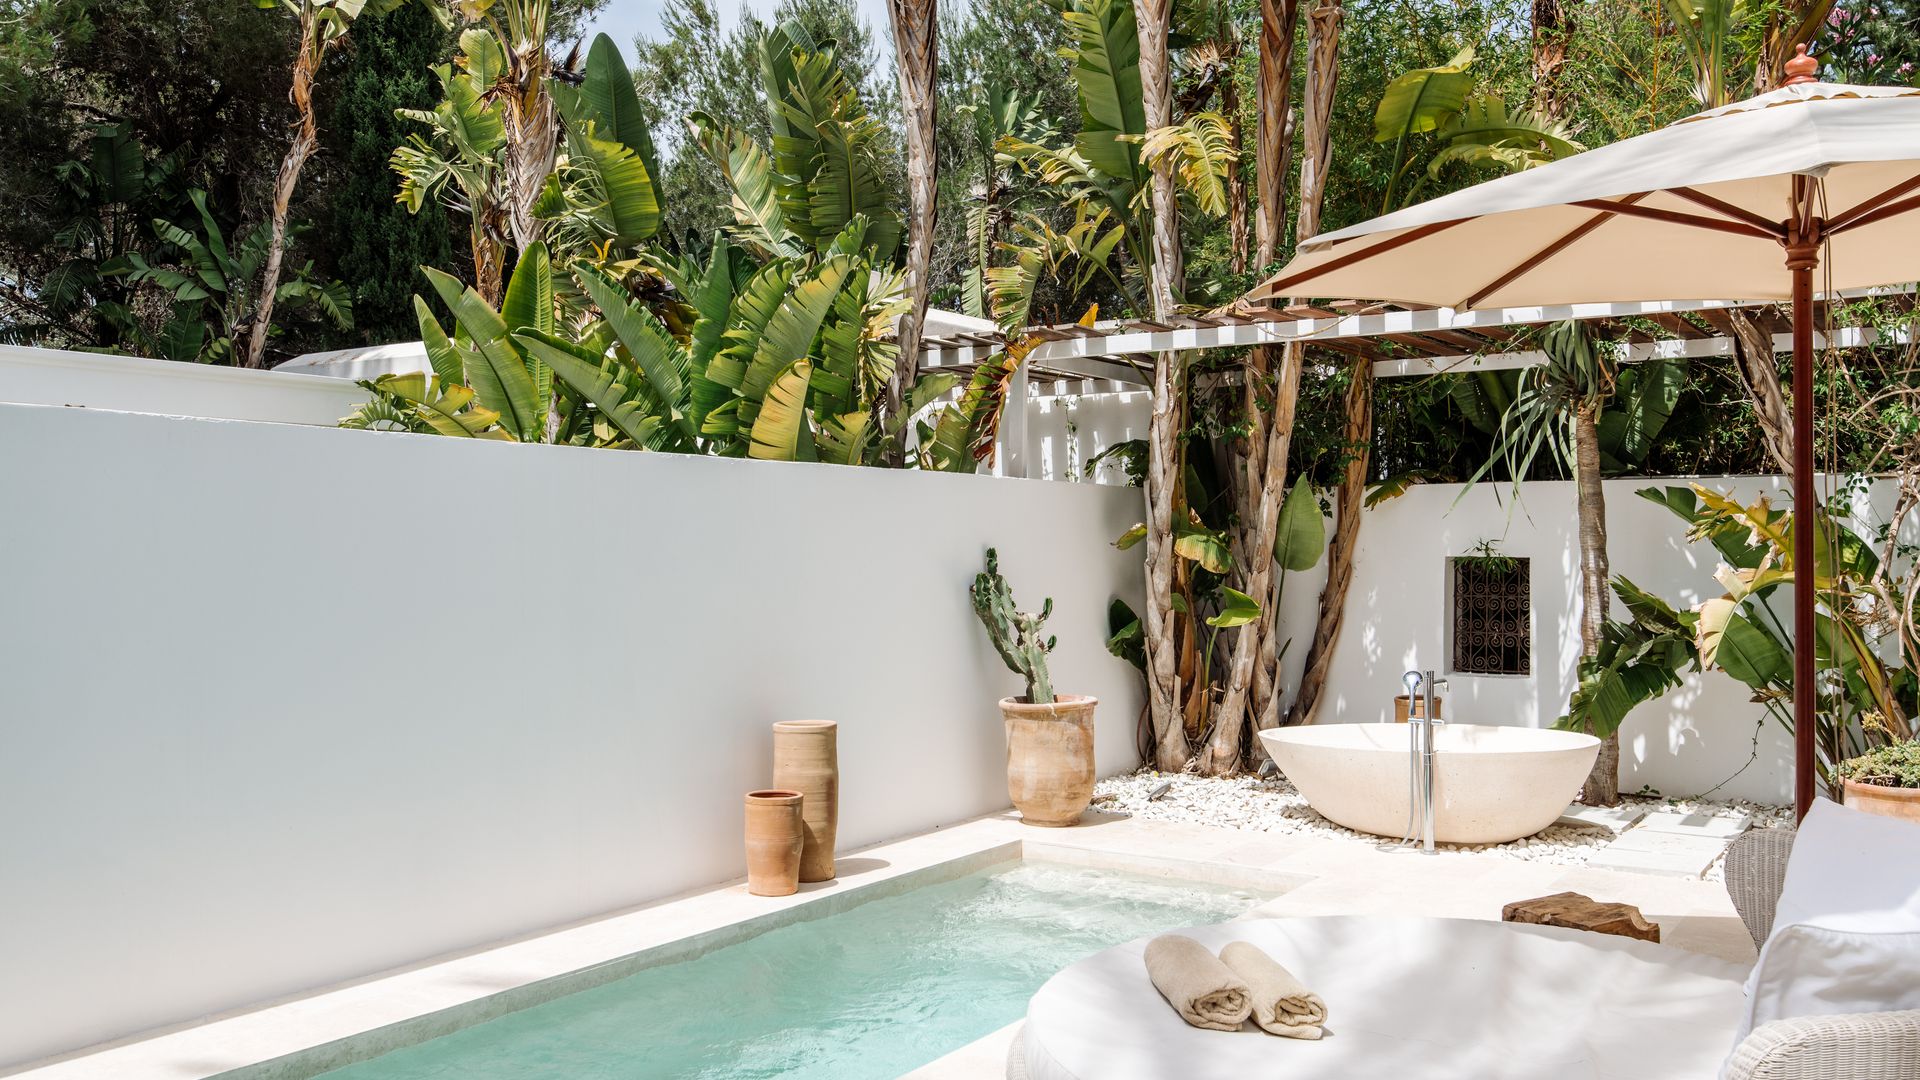 Ibiza’s Atzaró Agroturismo Hotel private pool with outdoor bath and loungers